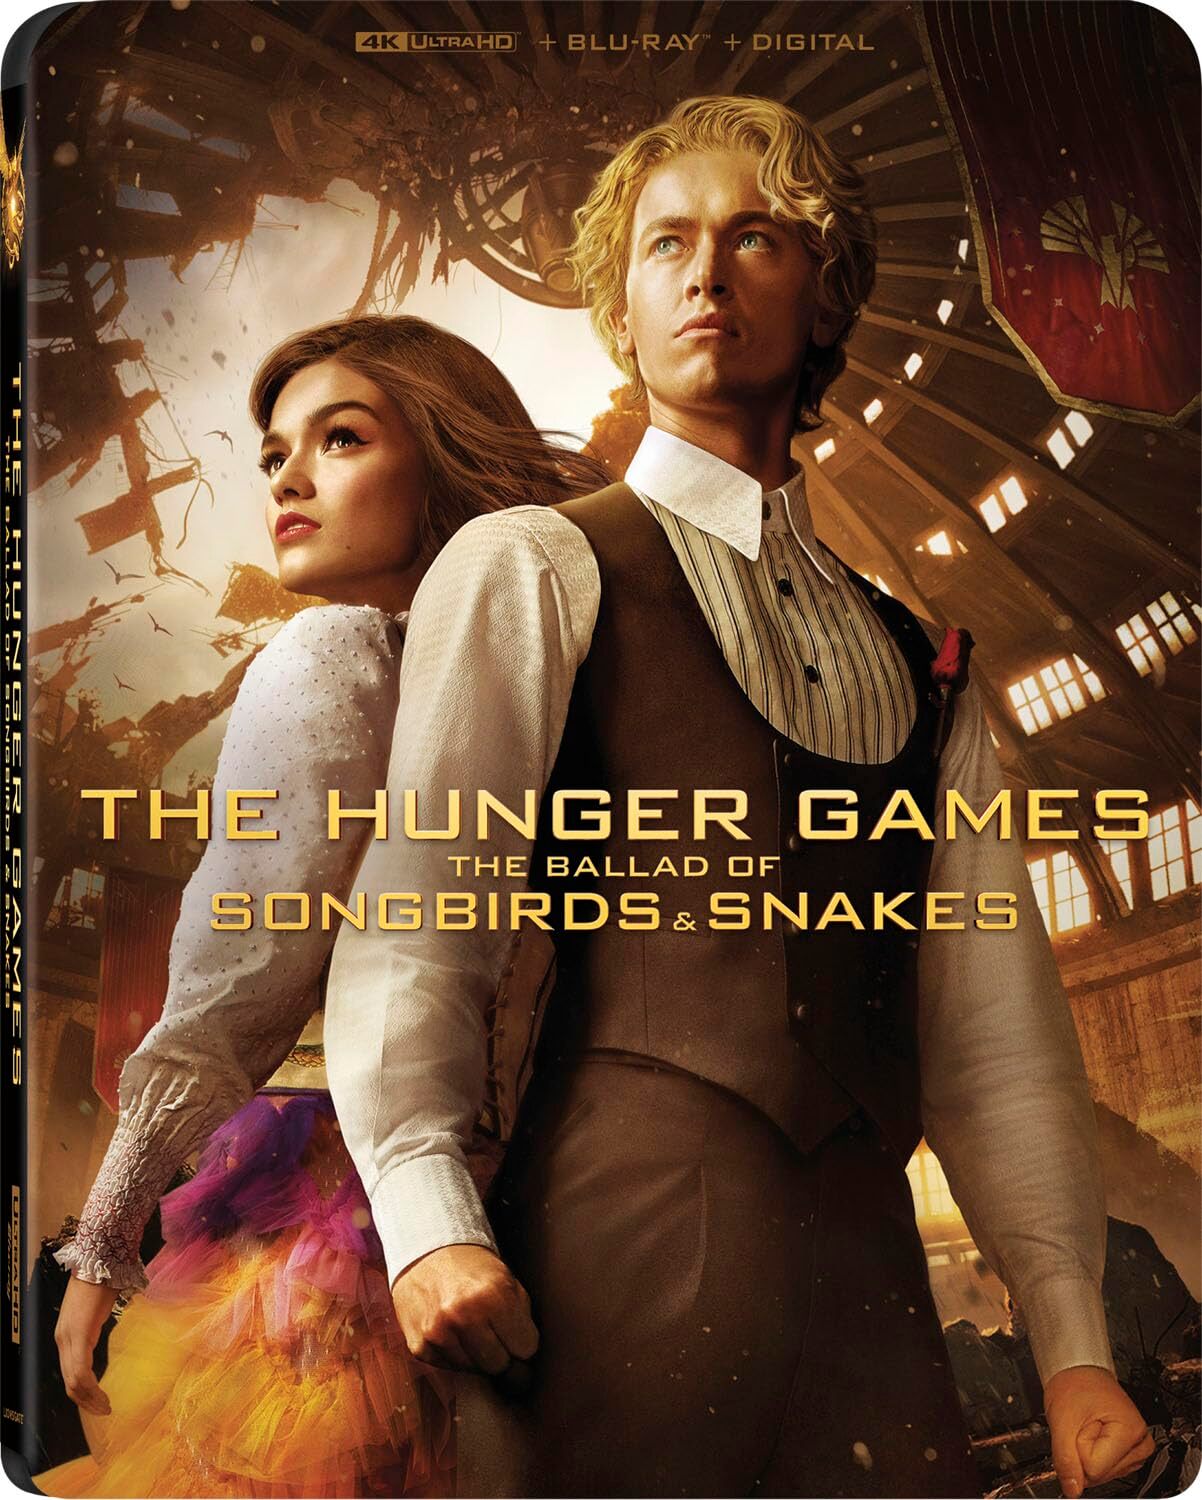 The Hunger Games: The Ballad of Songbirds and Snakes 4K Blu-ray